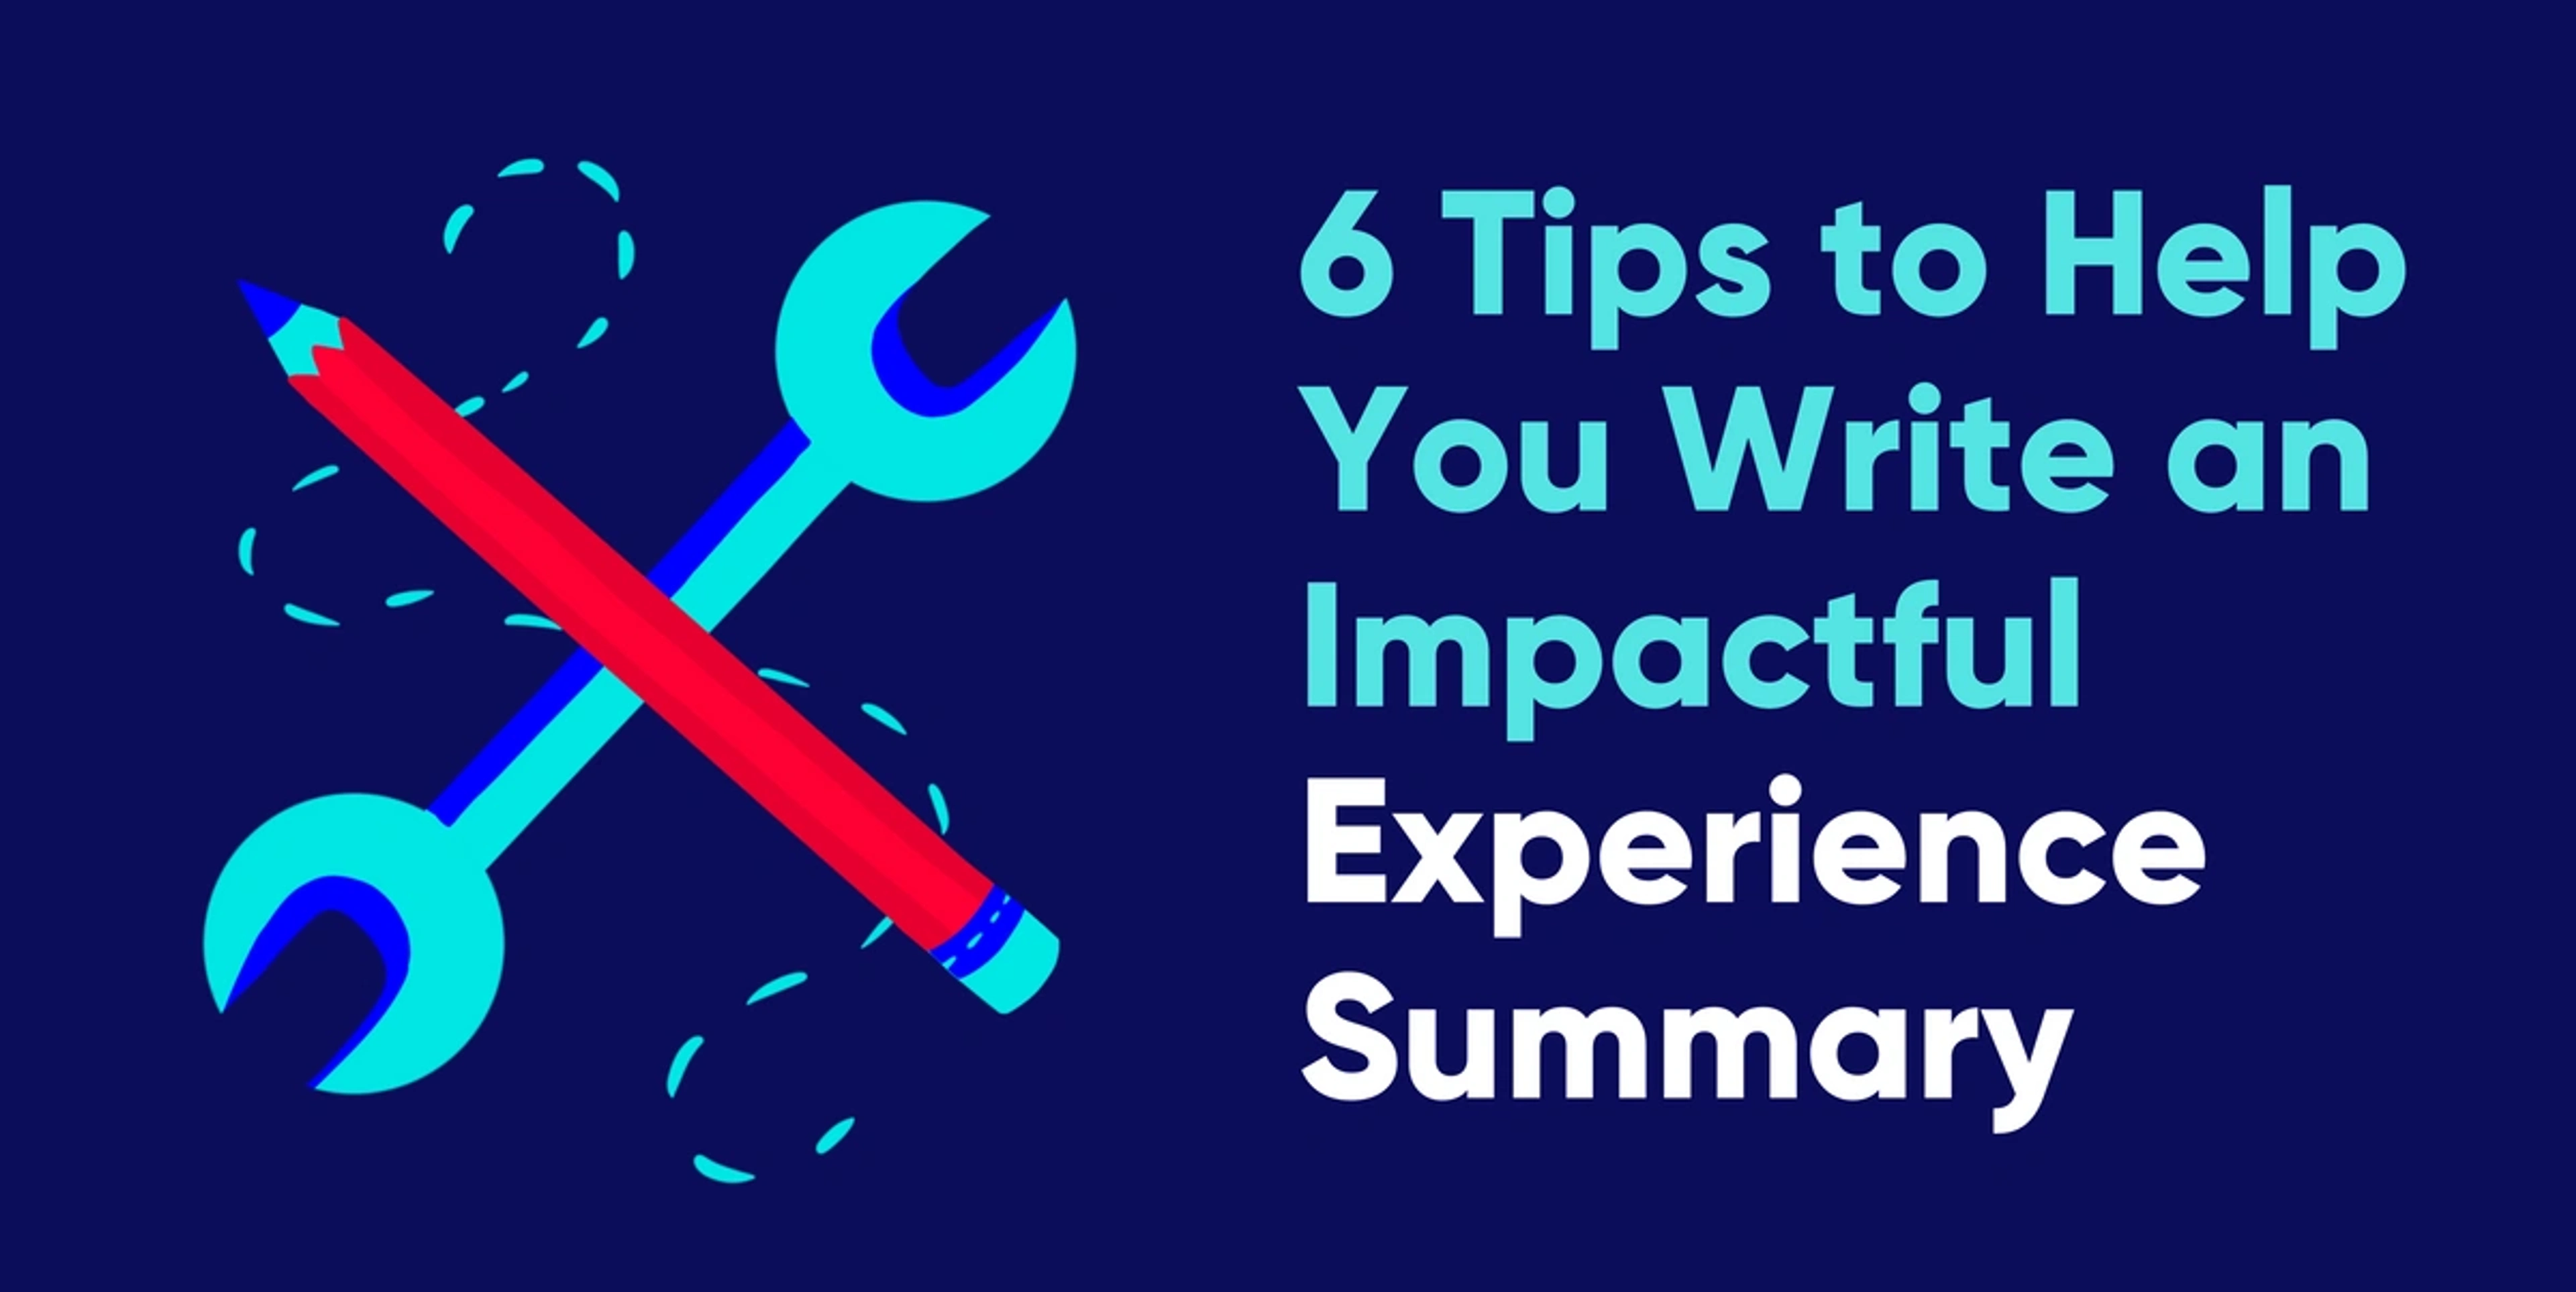 How to Write an Impactful Experience Summary